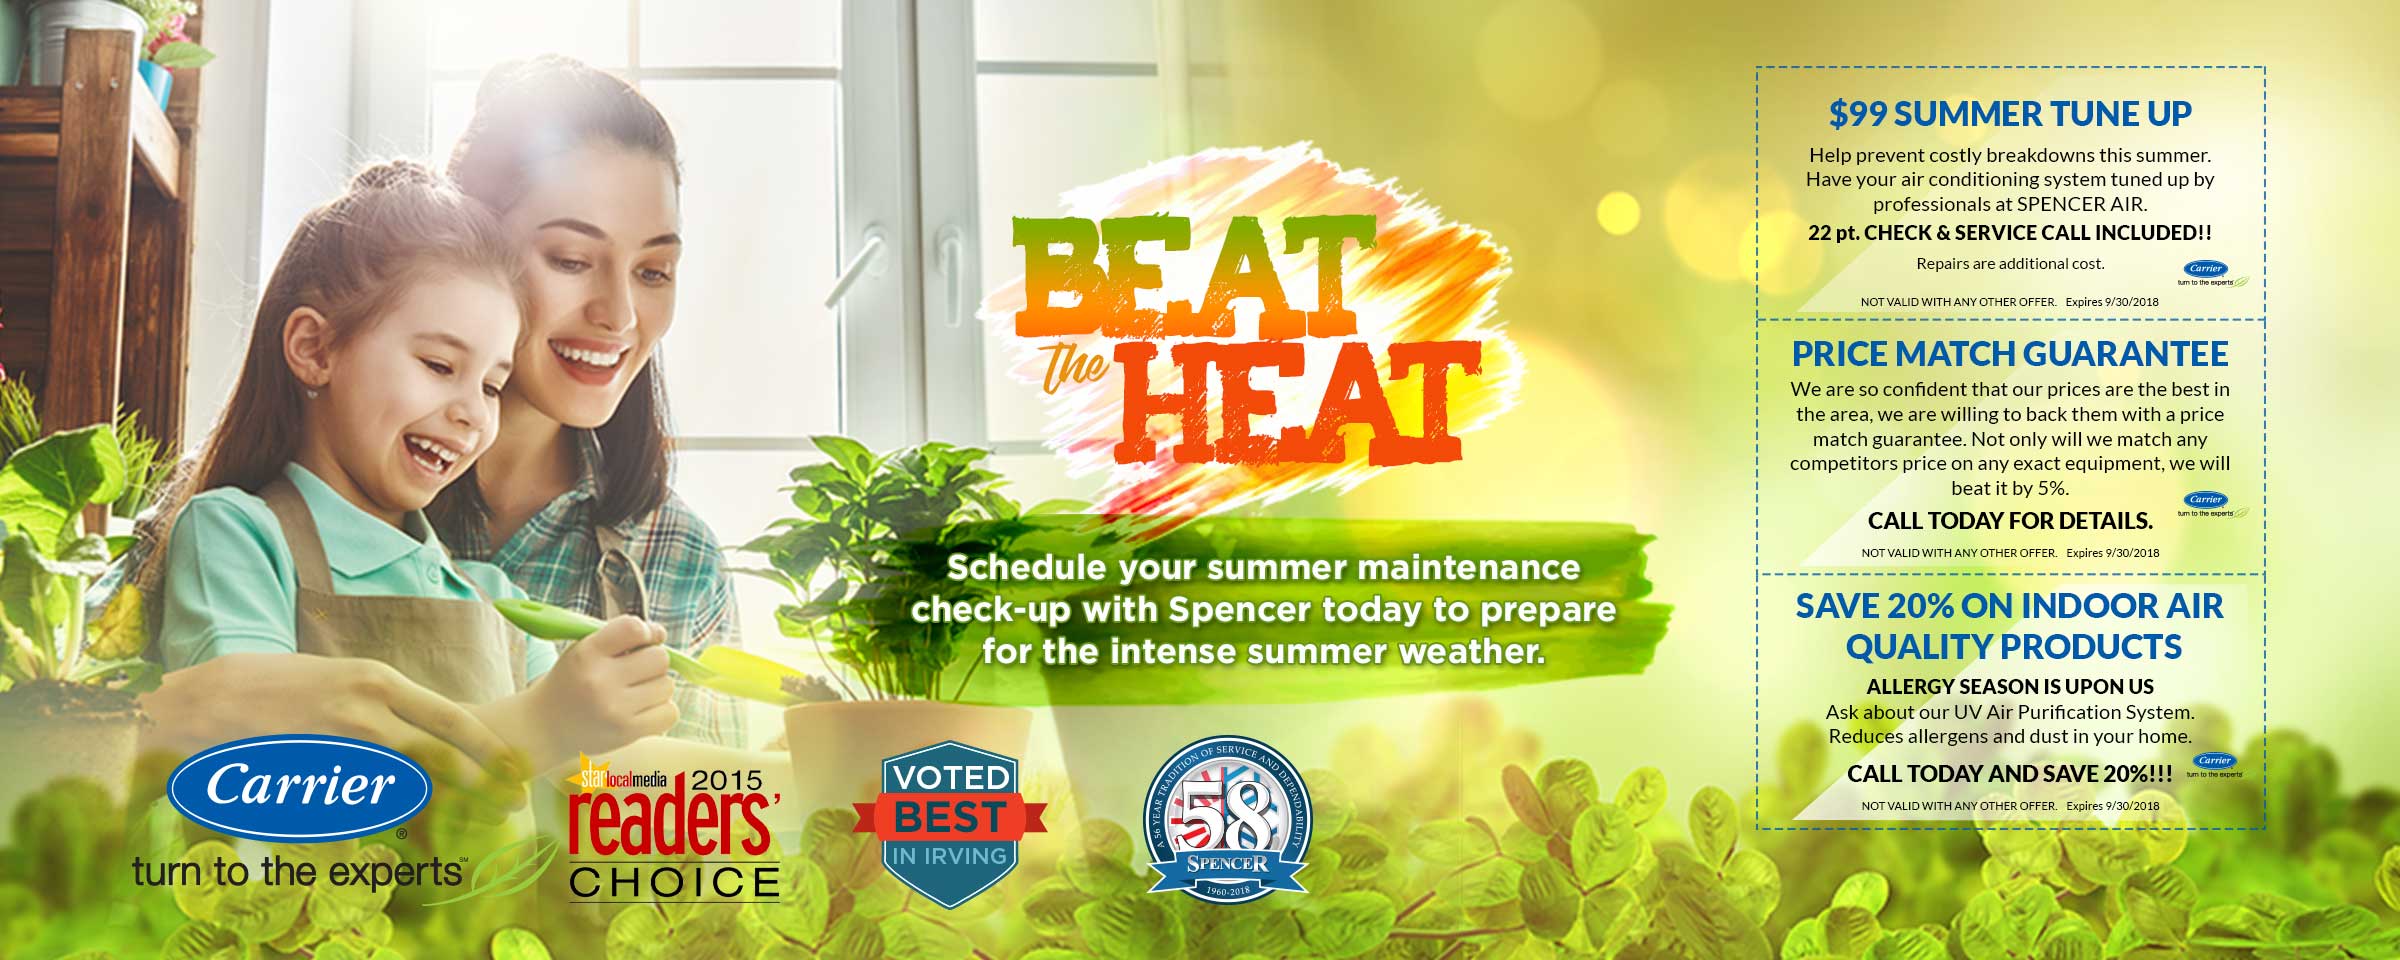 beat the heat schedule your summer maintenance check up with spencer today to prepare for the intense summer weather